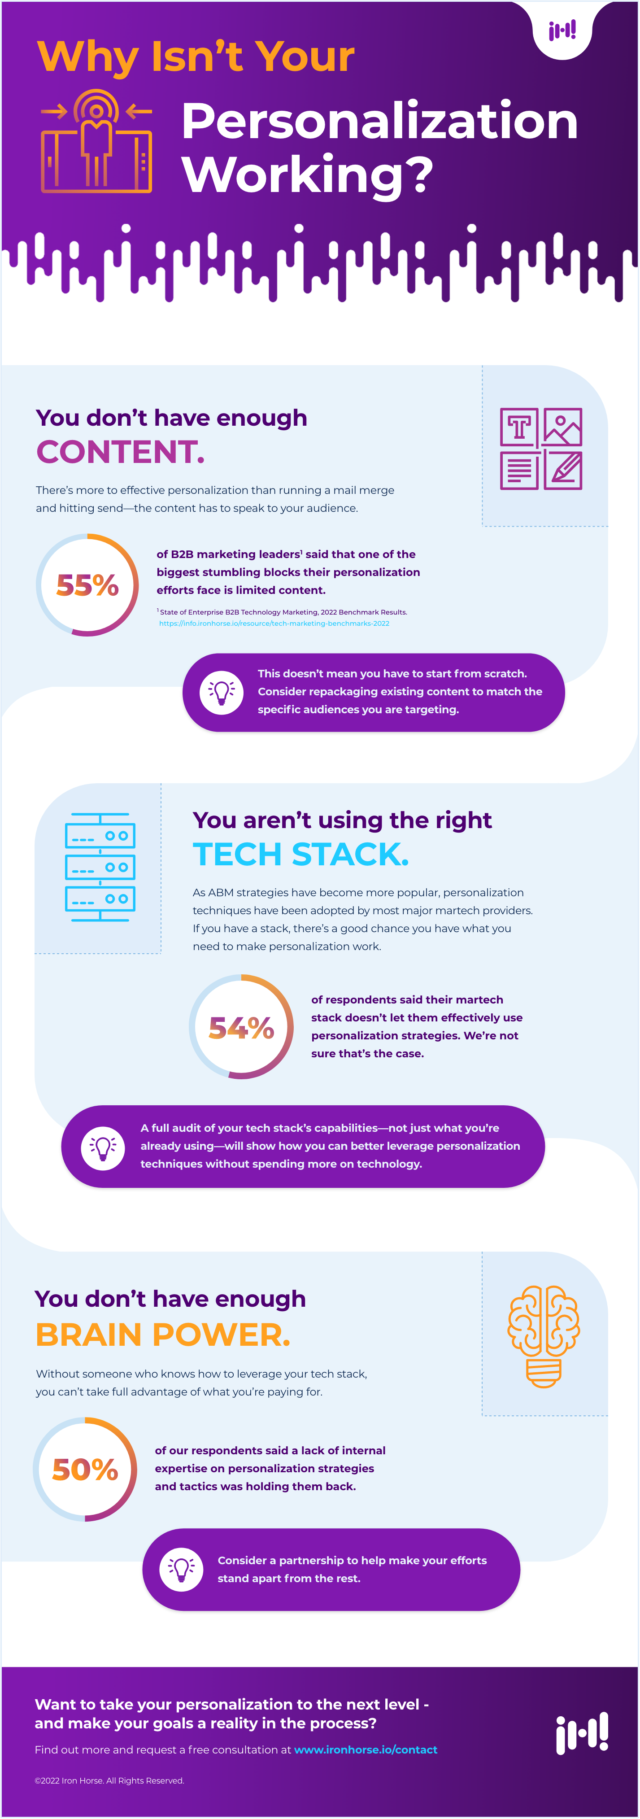 A purple and white graphic describing the three major reasons personalization campaigns don't work - you don't have the right content, you don't have the right tech stack, and you don't have the right brain power.